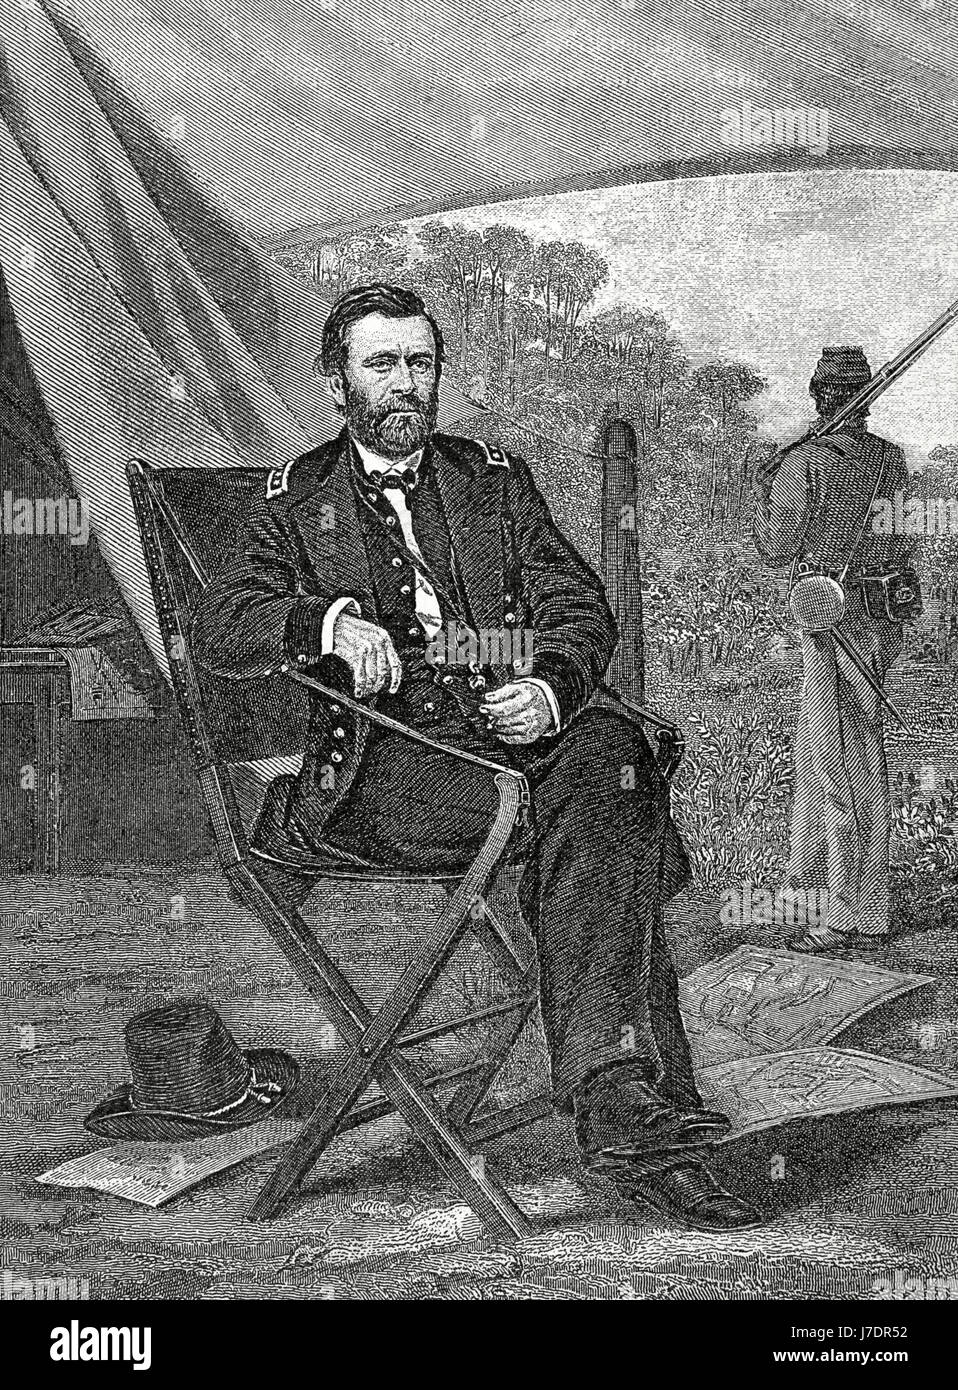 Ulysses S. Grant (1822-1885). Military and North American politician. 18th President of the United States (1869-1877). Portrait. Engraving. 'Historia Universal', 1885. Stock Photo